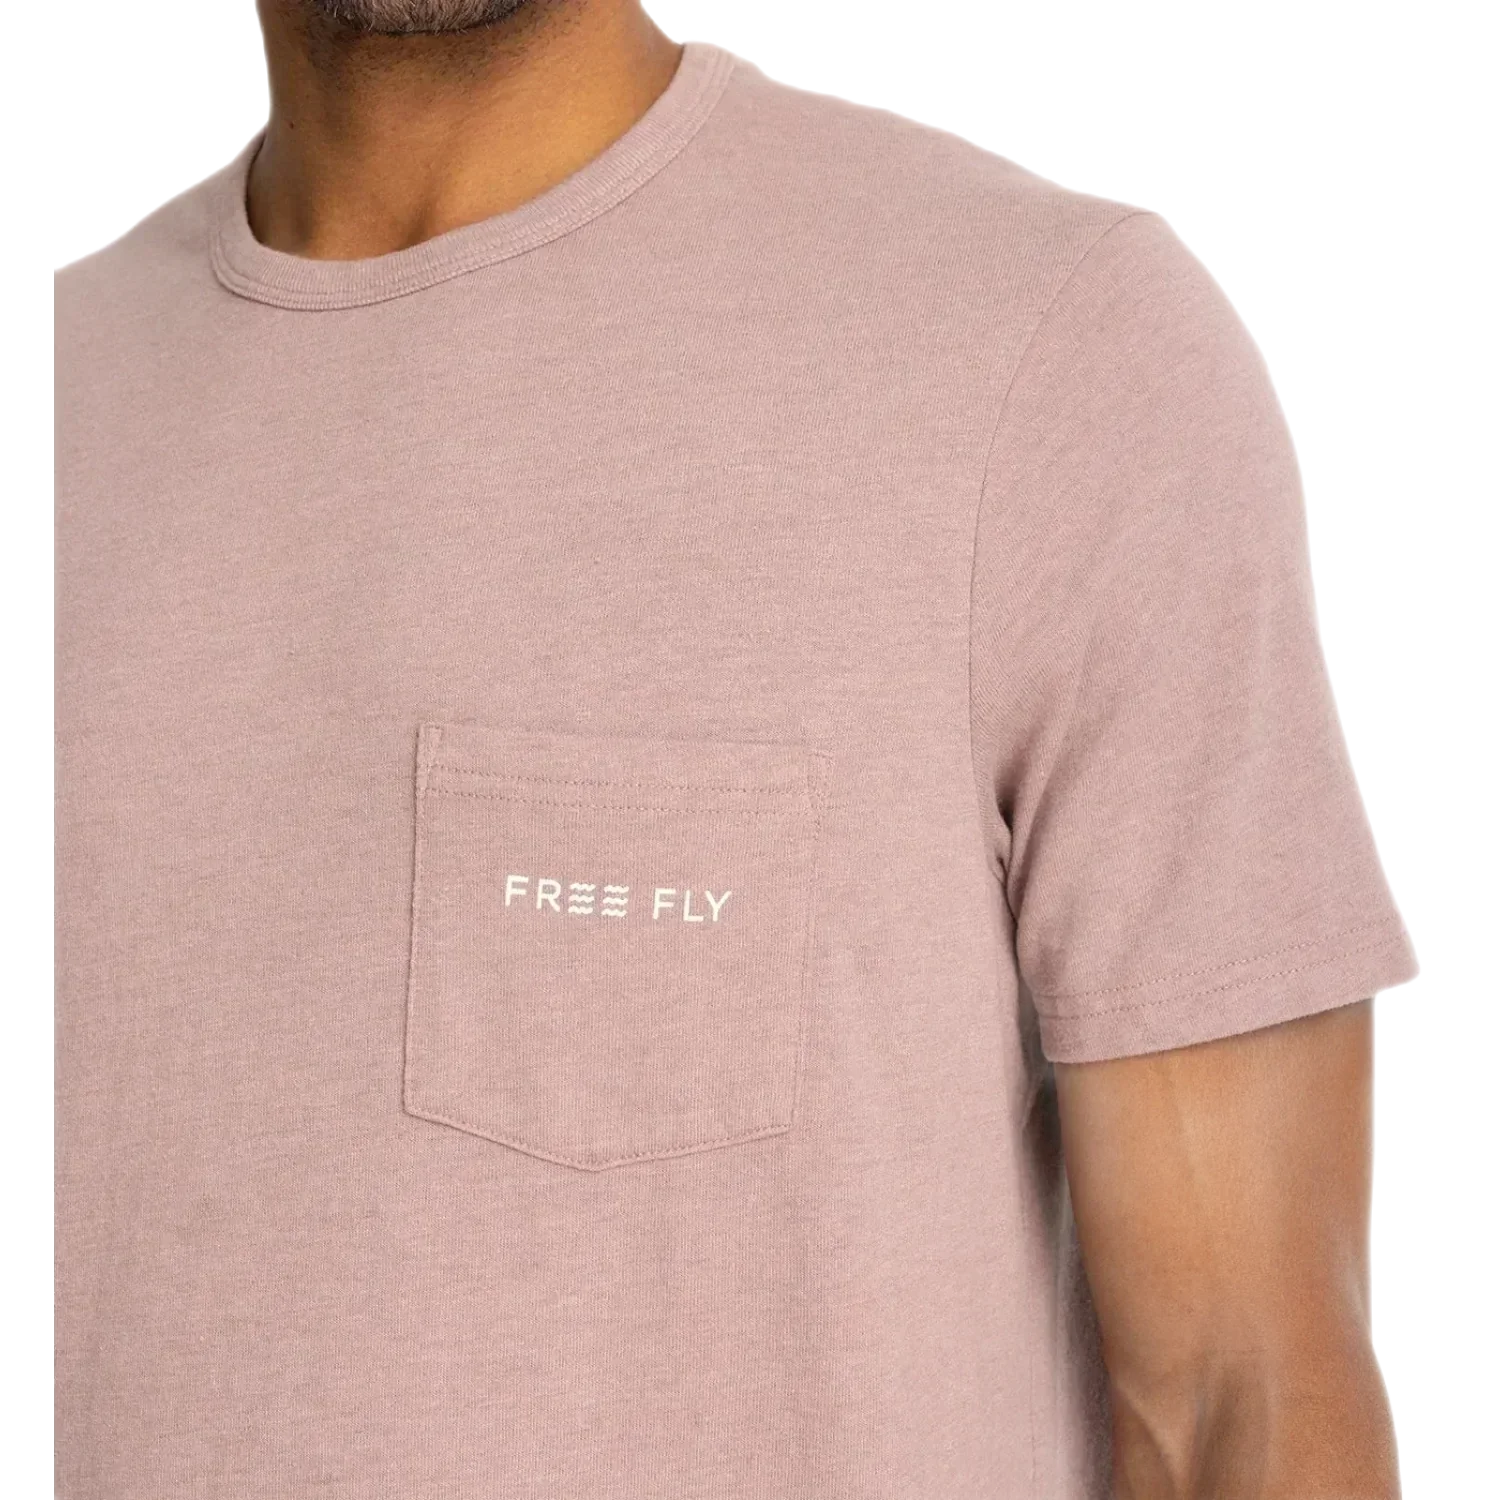 Free Fly Apparel 01. MENS APPAREL - MENS T-SHIRTS - MENS T-SHIRT SS Men's Channel Markers Pocket Tee HEATHER FIG